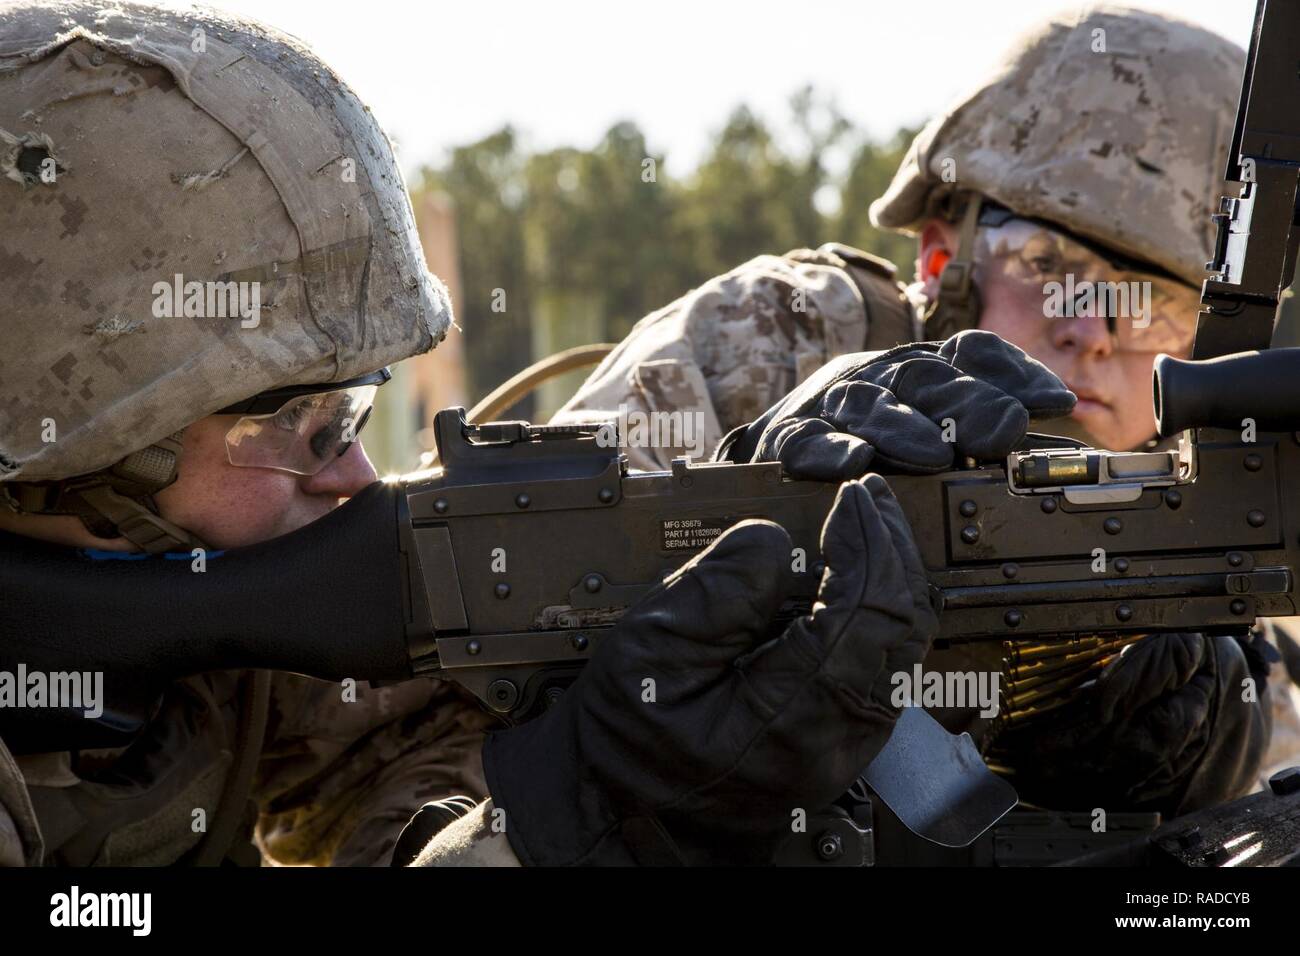 Entry level Marines with Kilo Company, Marine Combat Training Battalion (MCT), School of Infantry-East, reload a M240G Medium Machinegun during a live fire exercise on Camp Lejeune, N.C., Jan. 13, 2017. Marines attending MCT conducted a live fire exercise to familiarize themselves with the weapon system. Stock Photo